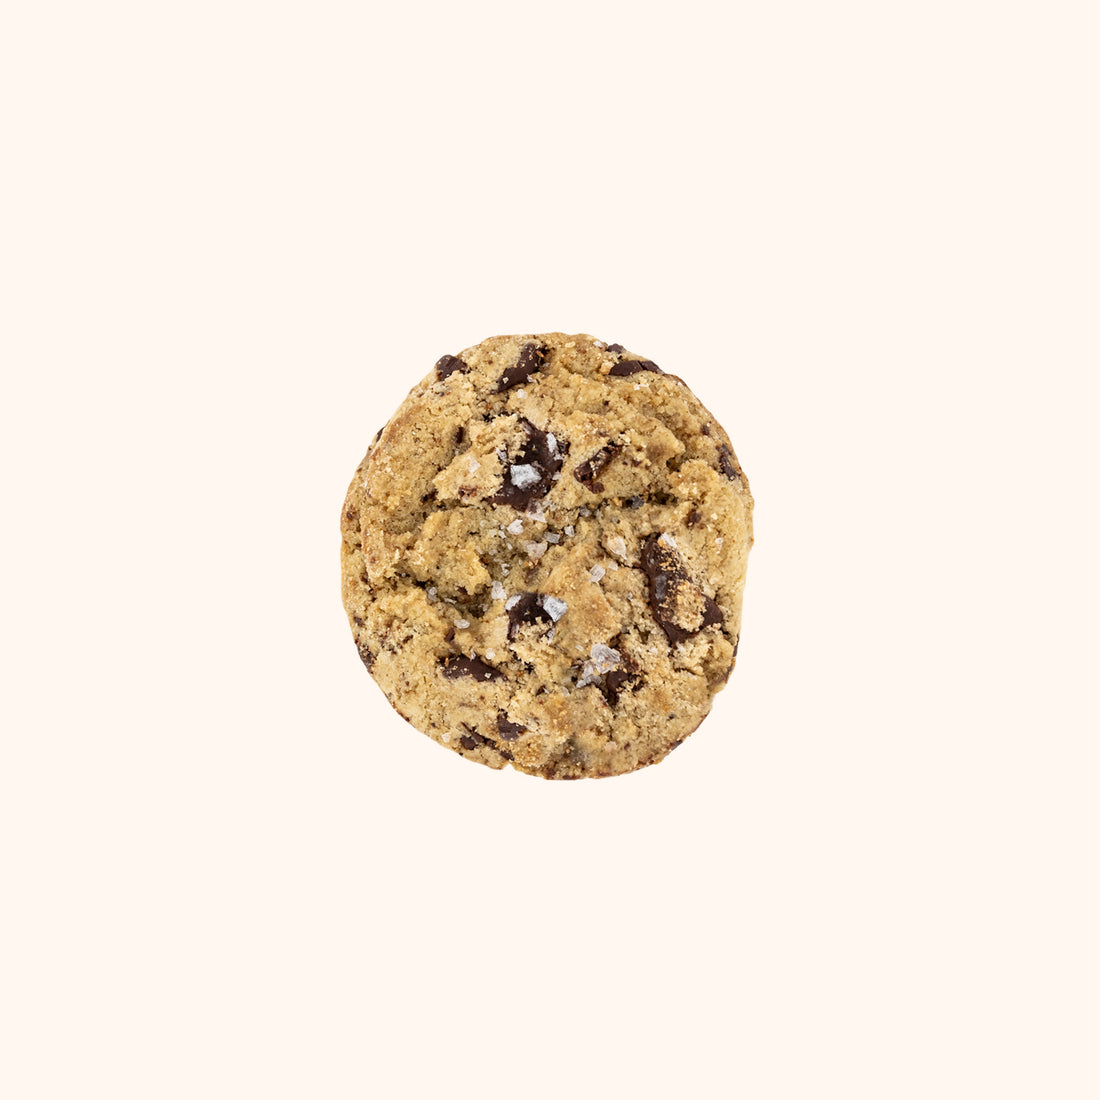 Snack Pack - Chocolate Chip